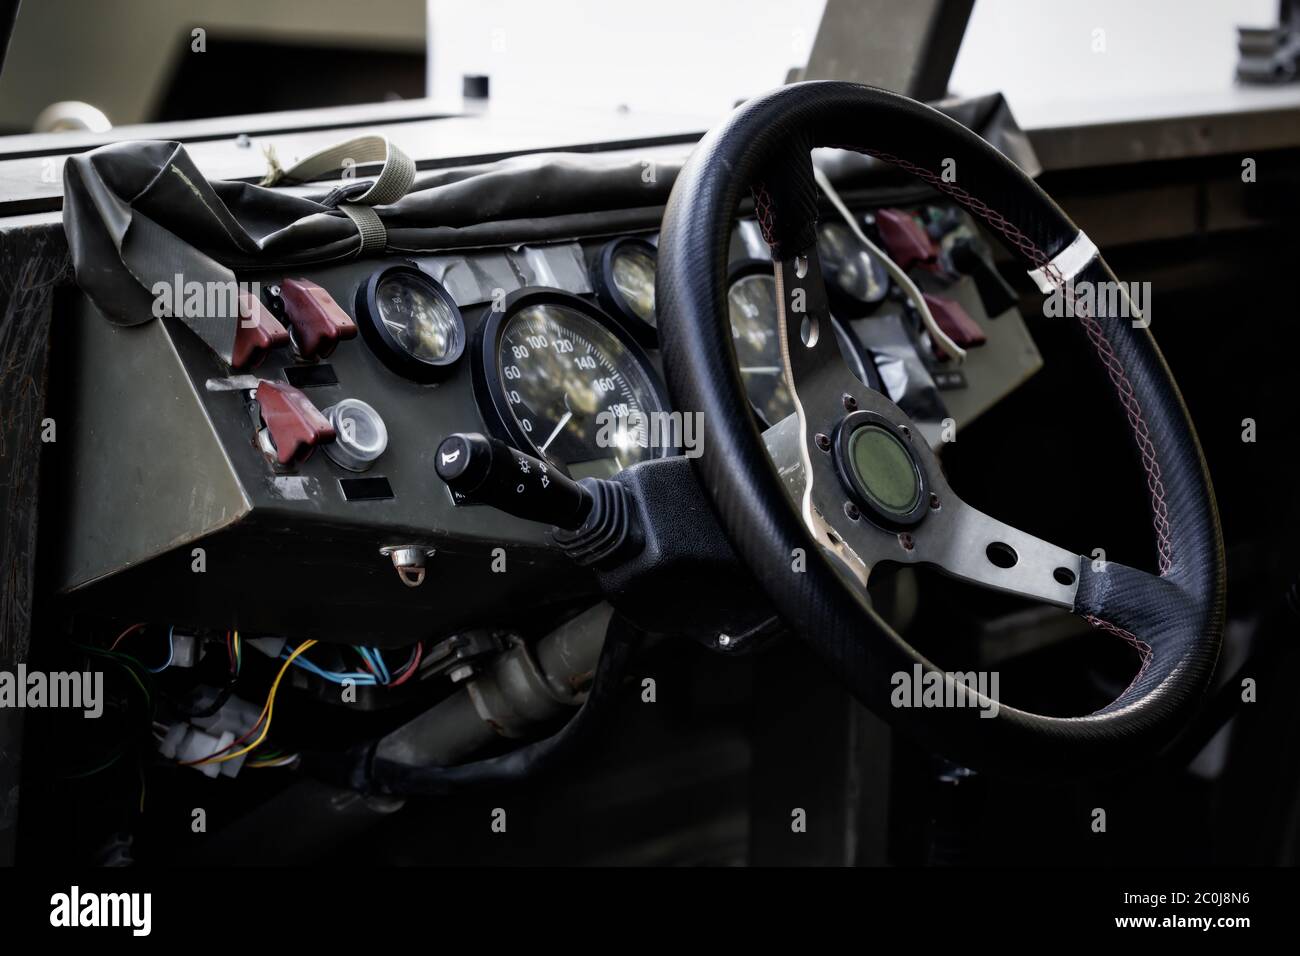 Military vehicle. Army Jeep Interior detail.  Interior Design, Steering Wheel and Dashboard Stock Photo